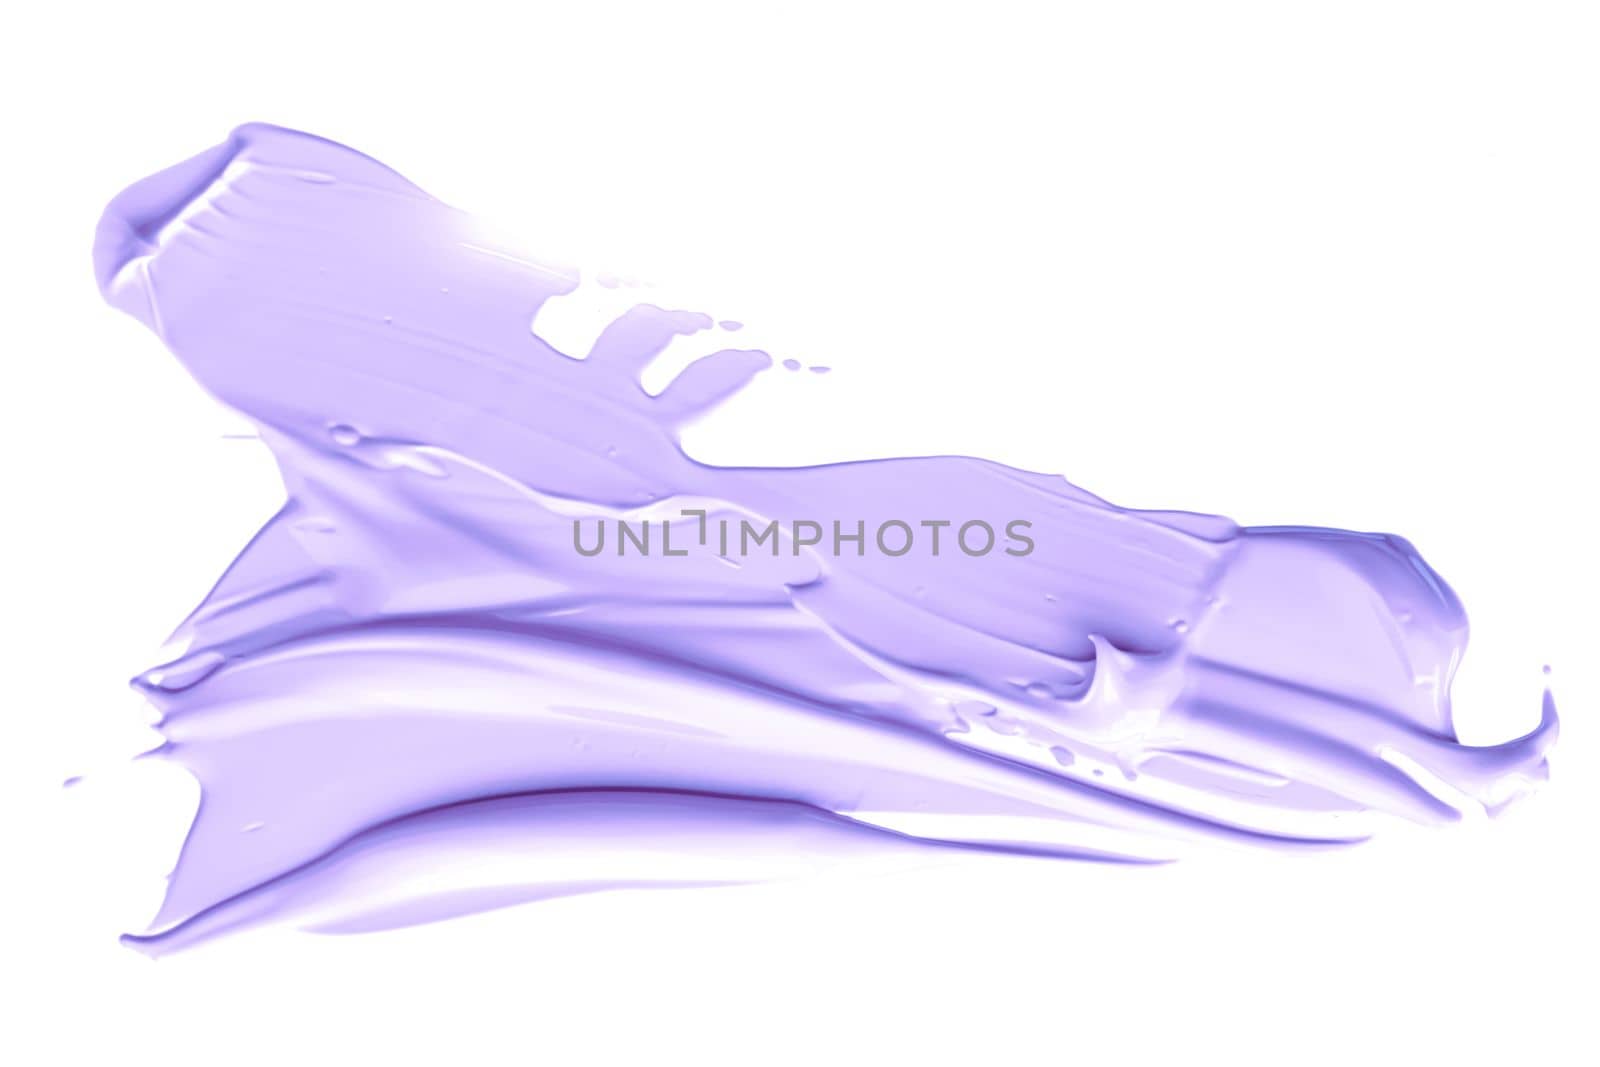 Pastel purple beauty swatch, skincare and makeup cosmetic product sample texture isolated on white background, make-up smudge, cream cosmetics smear or paint brush stroke closeup